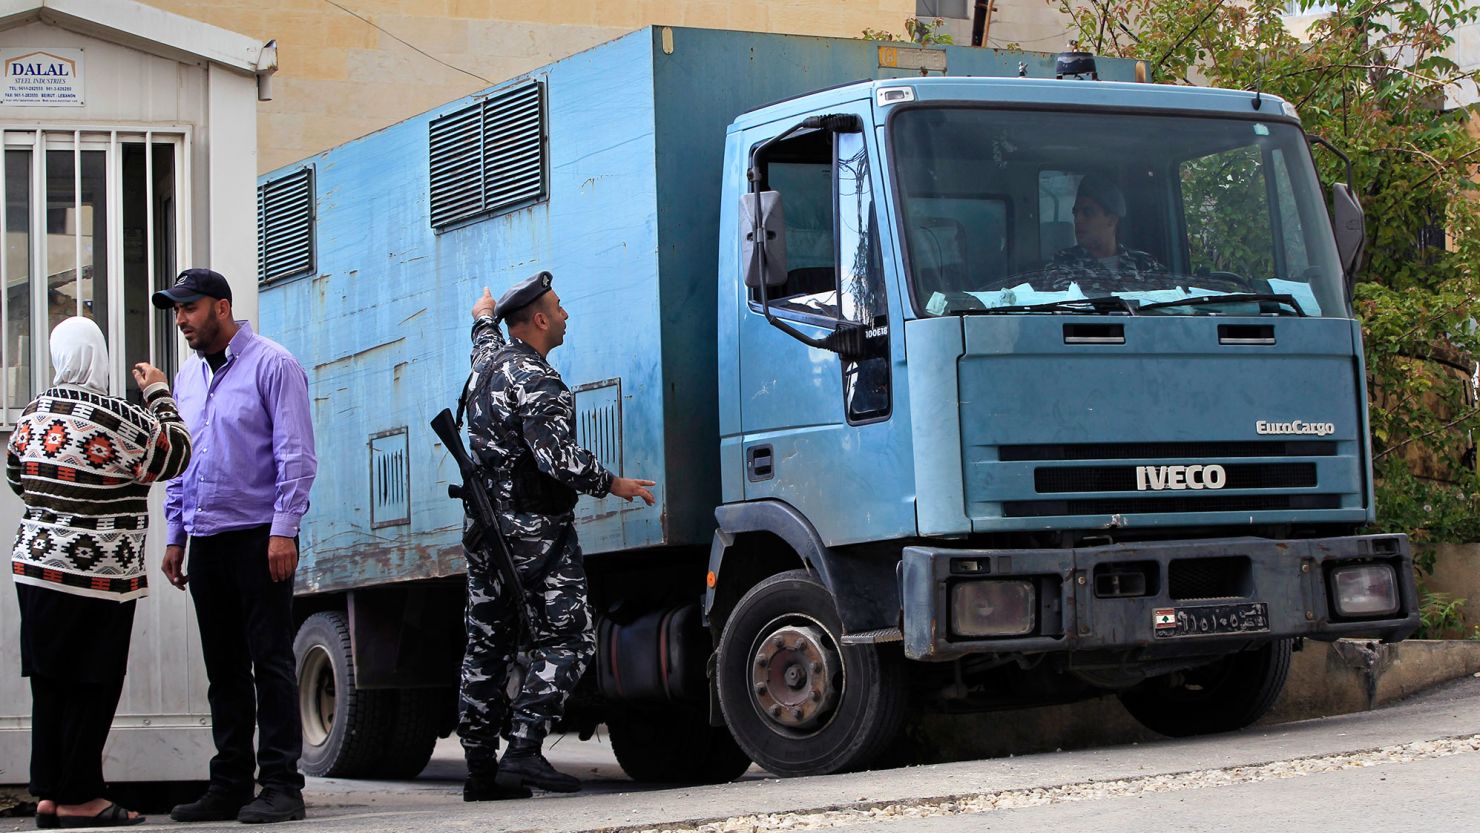 A police van transports Australian suspects Sally Faulkner and Tara Brown to a prison in a Beirut suburb.